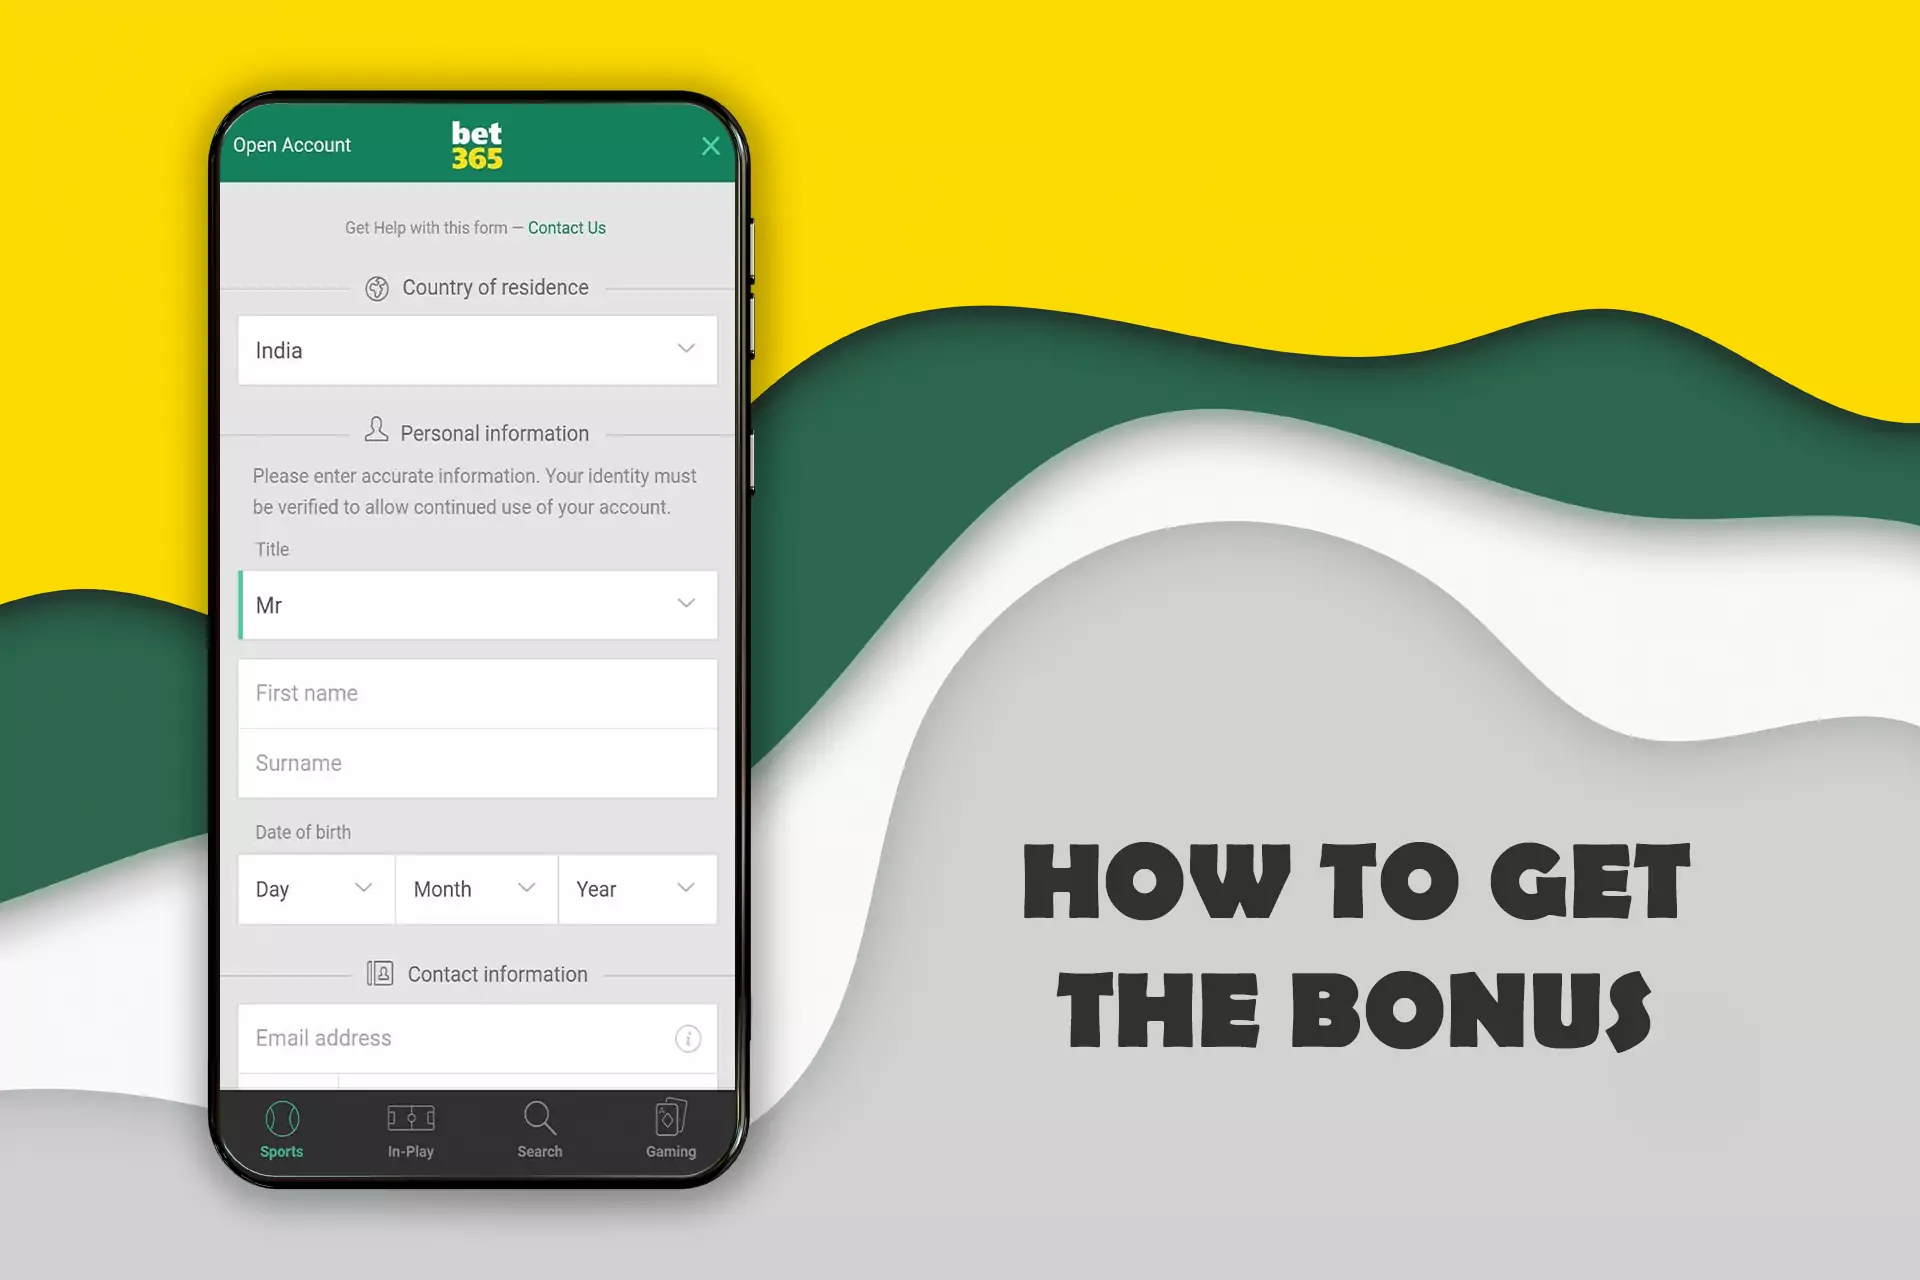 To get the bonus on the first deposit you have to sign up on the Bet365 site.